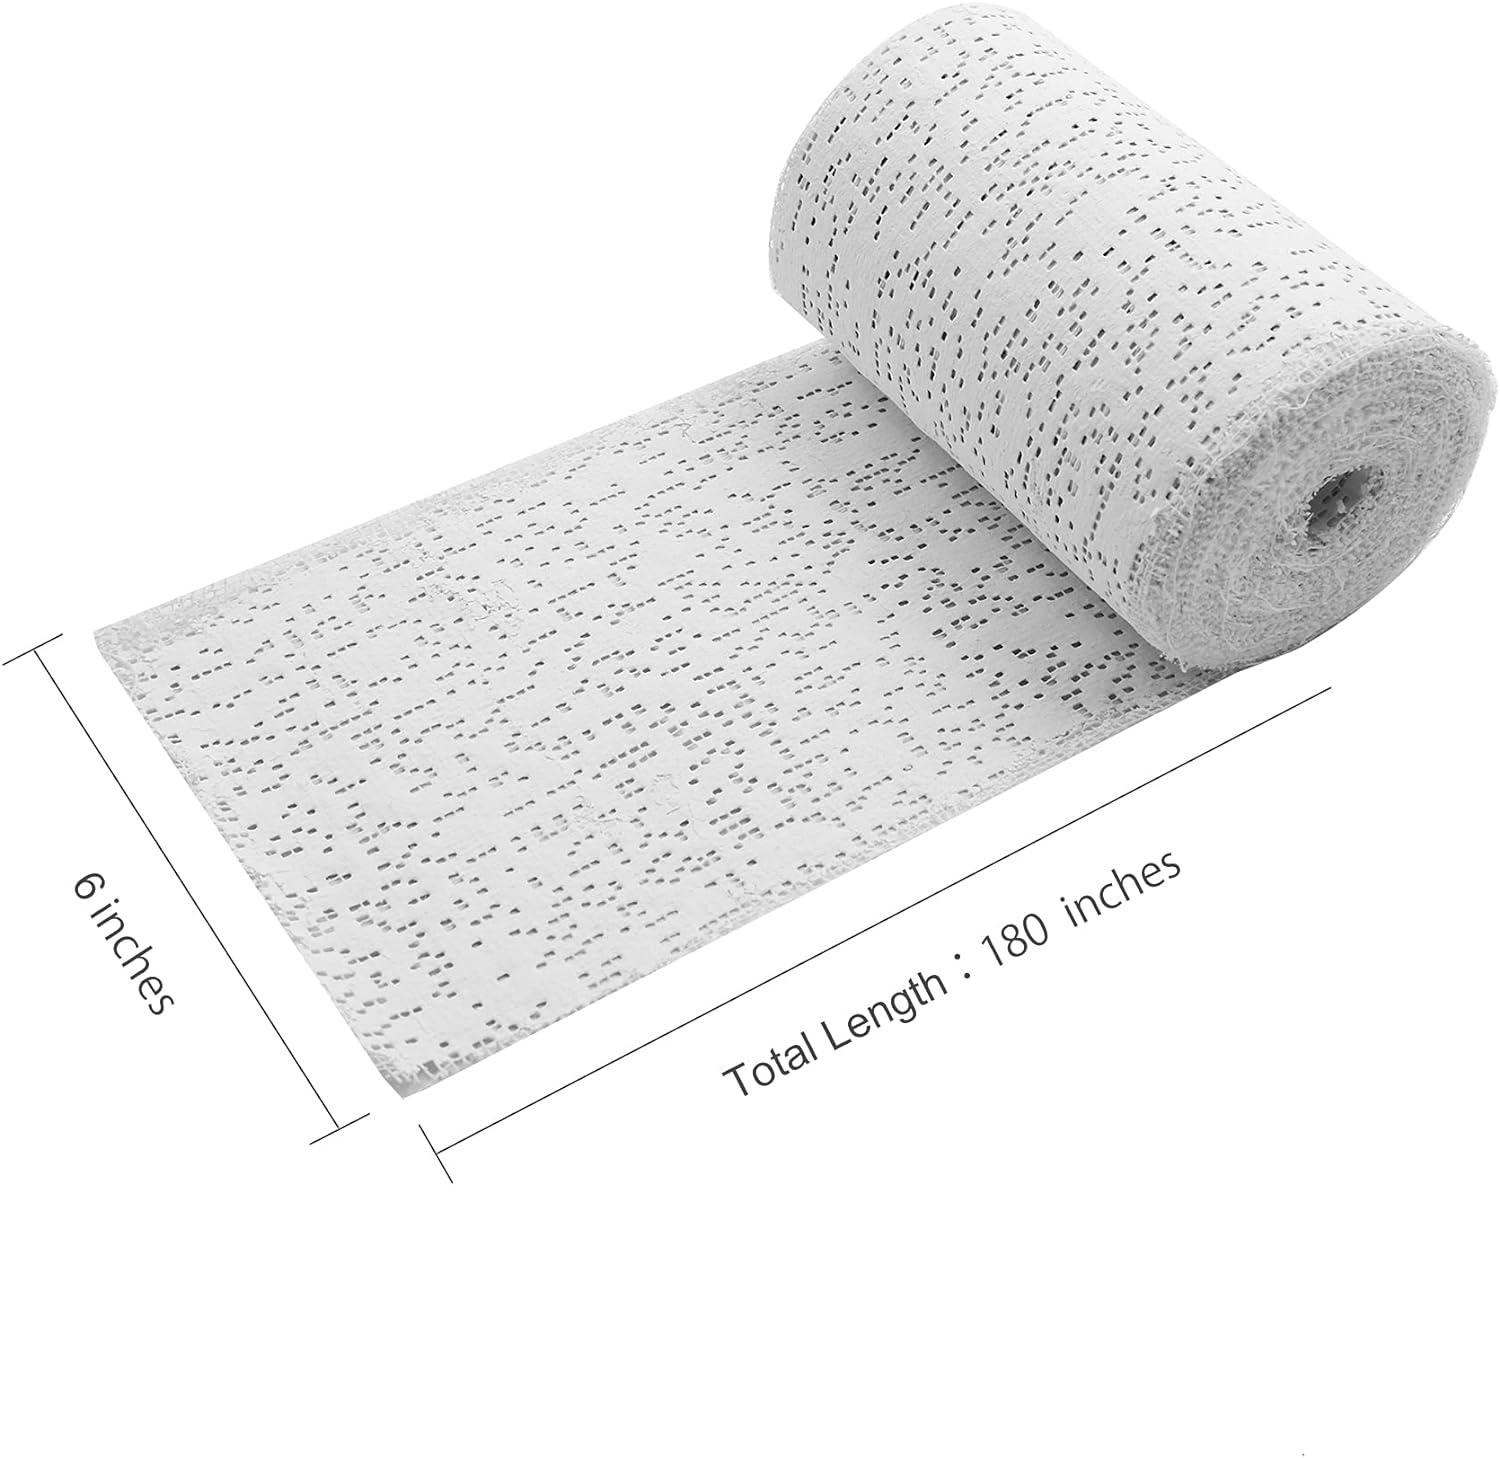 Plaster Cloth Rolls (Pack of 12) - Gauze Bandages for Body Casts